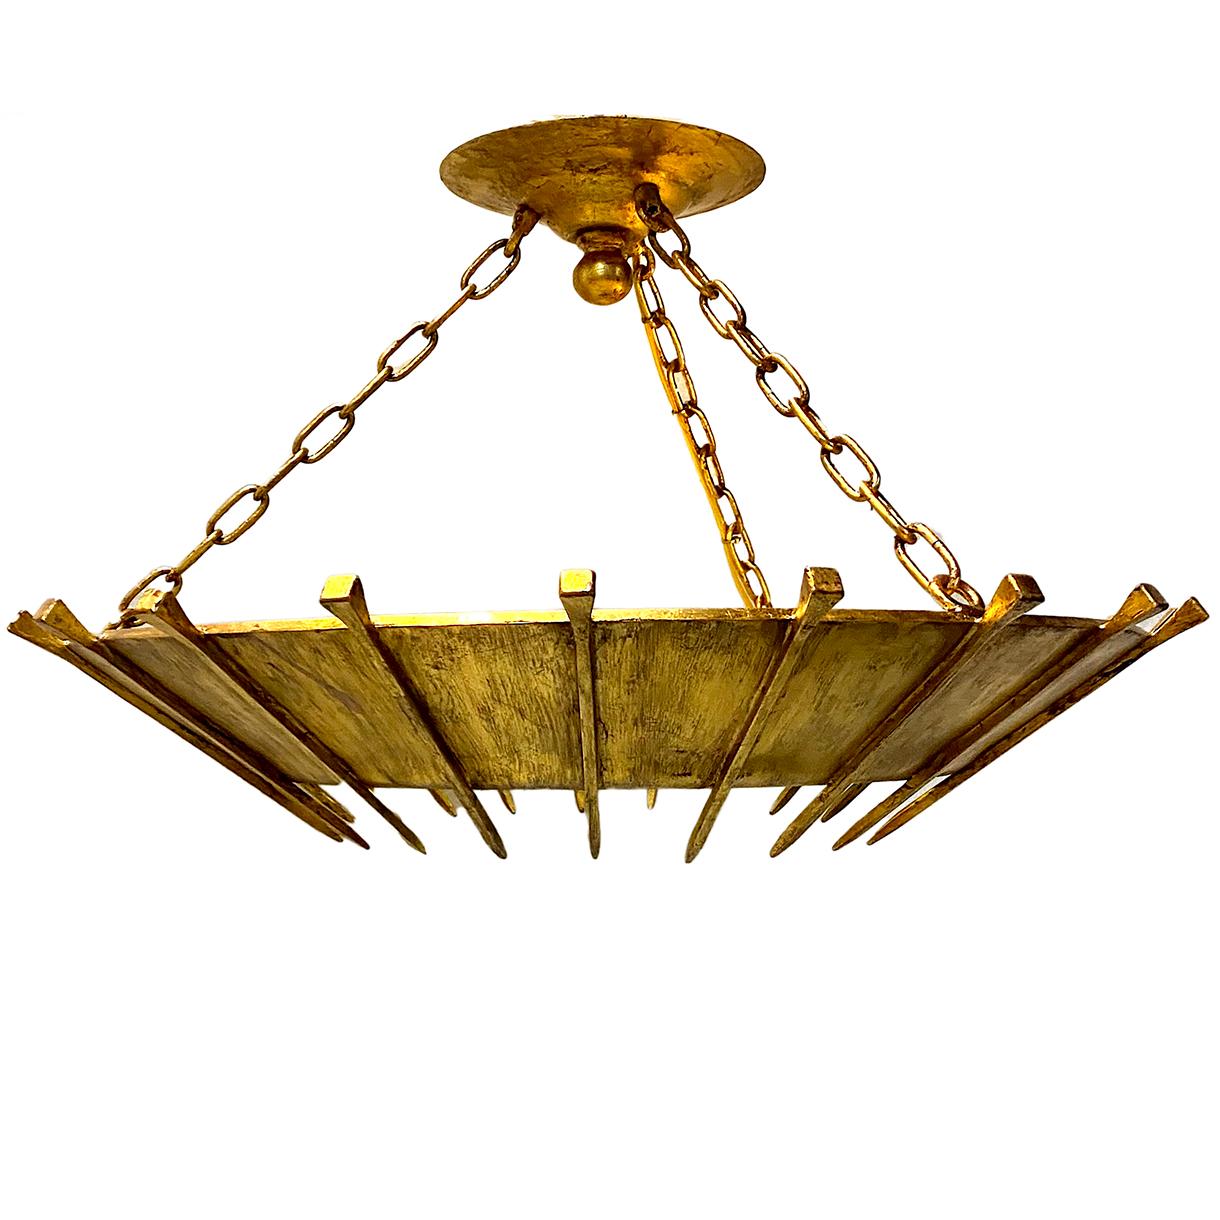 Pair of circa 1950s gilt metal light pendant light fixtures with nail details on body, glass inset and four interior lights. Sold individually.

Measurements:
Diameter 26